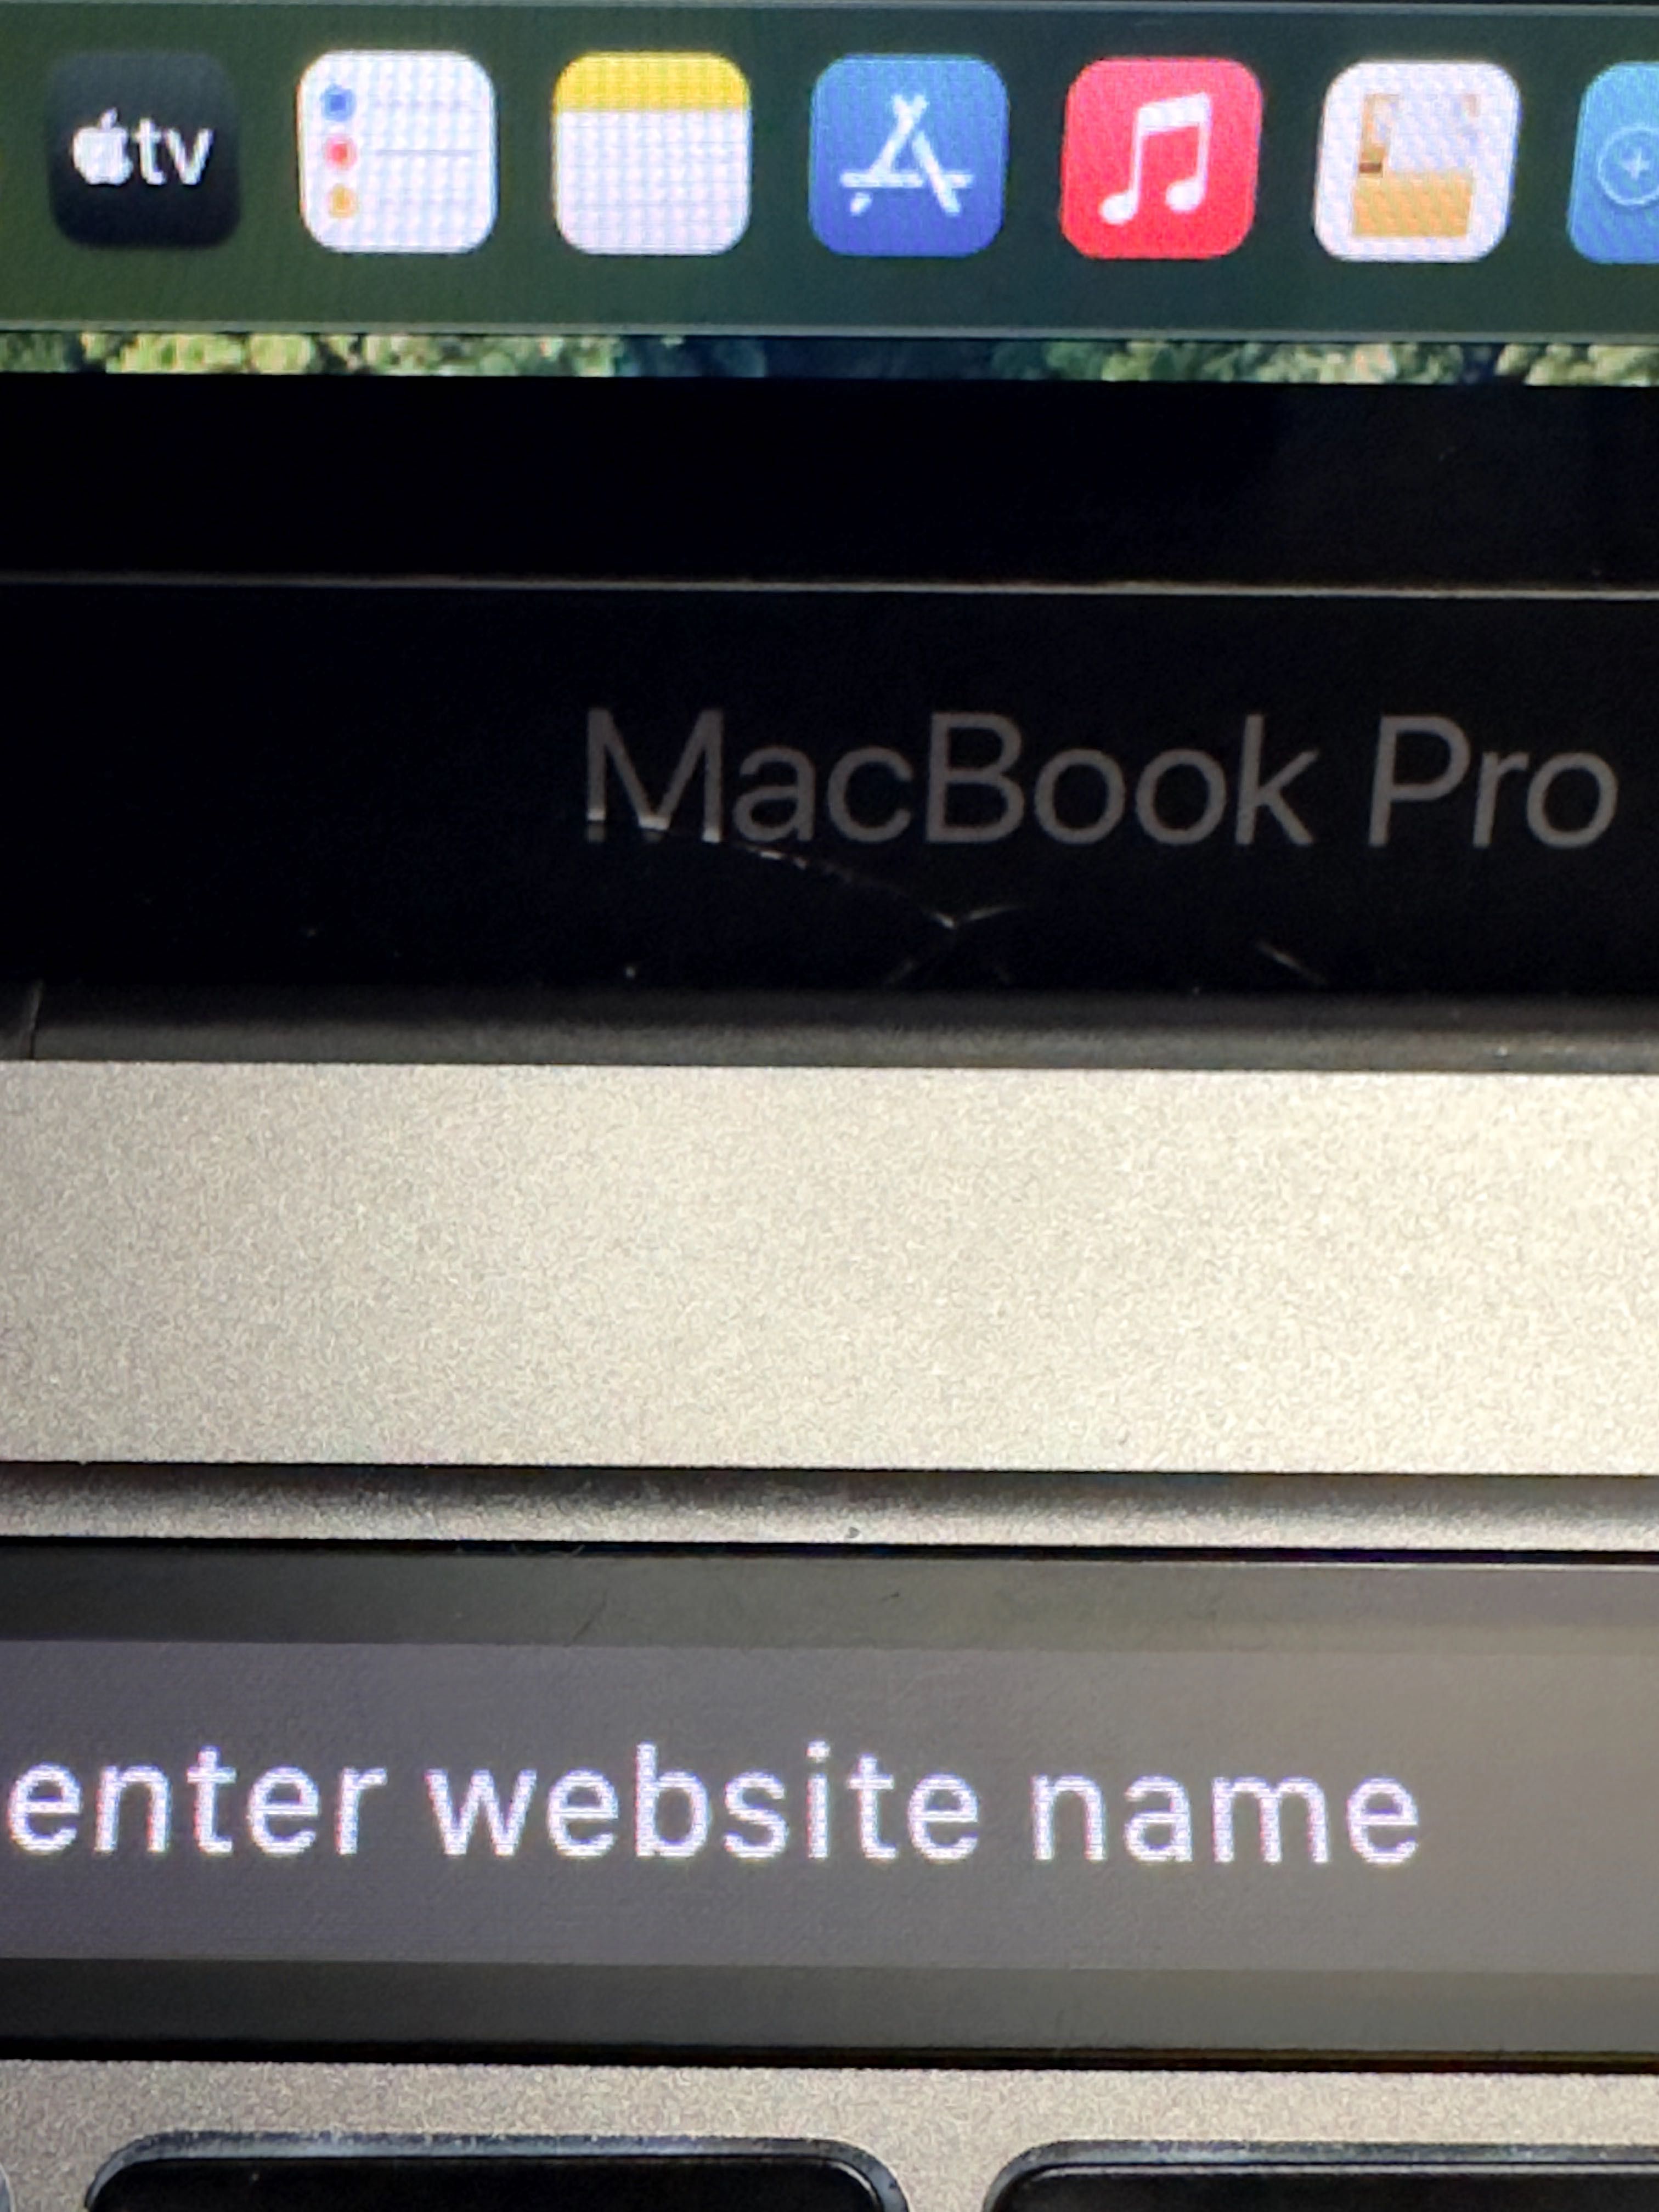 MacBook Pro 13 inch 2018 Touch Bar, 4 Thunderbolt 3 ports